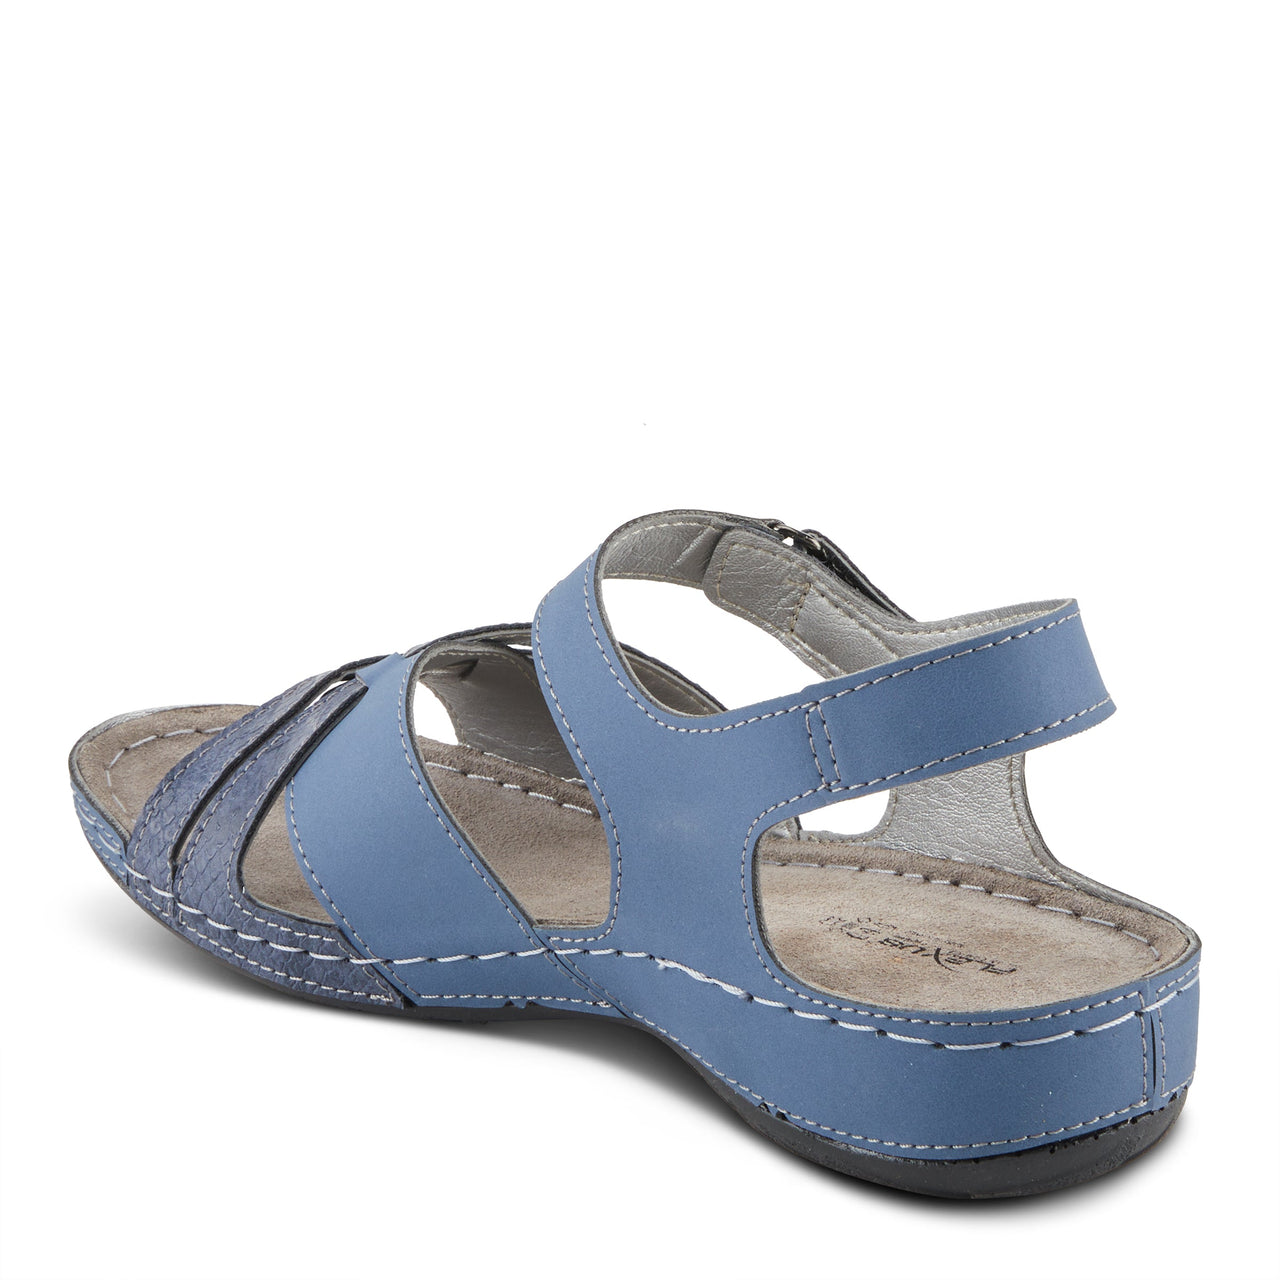 Spring Step Shoes Flexus Alvina Sandals - Back View with decorative stitching